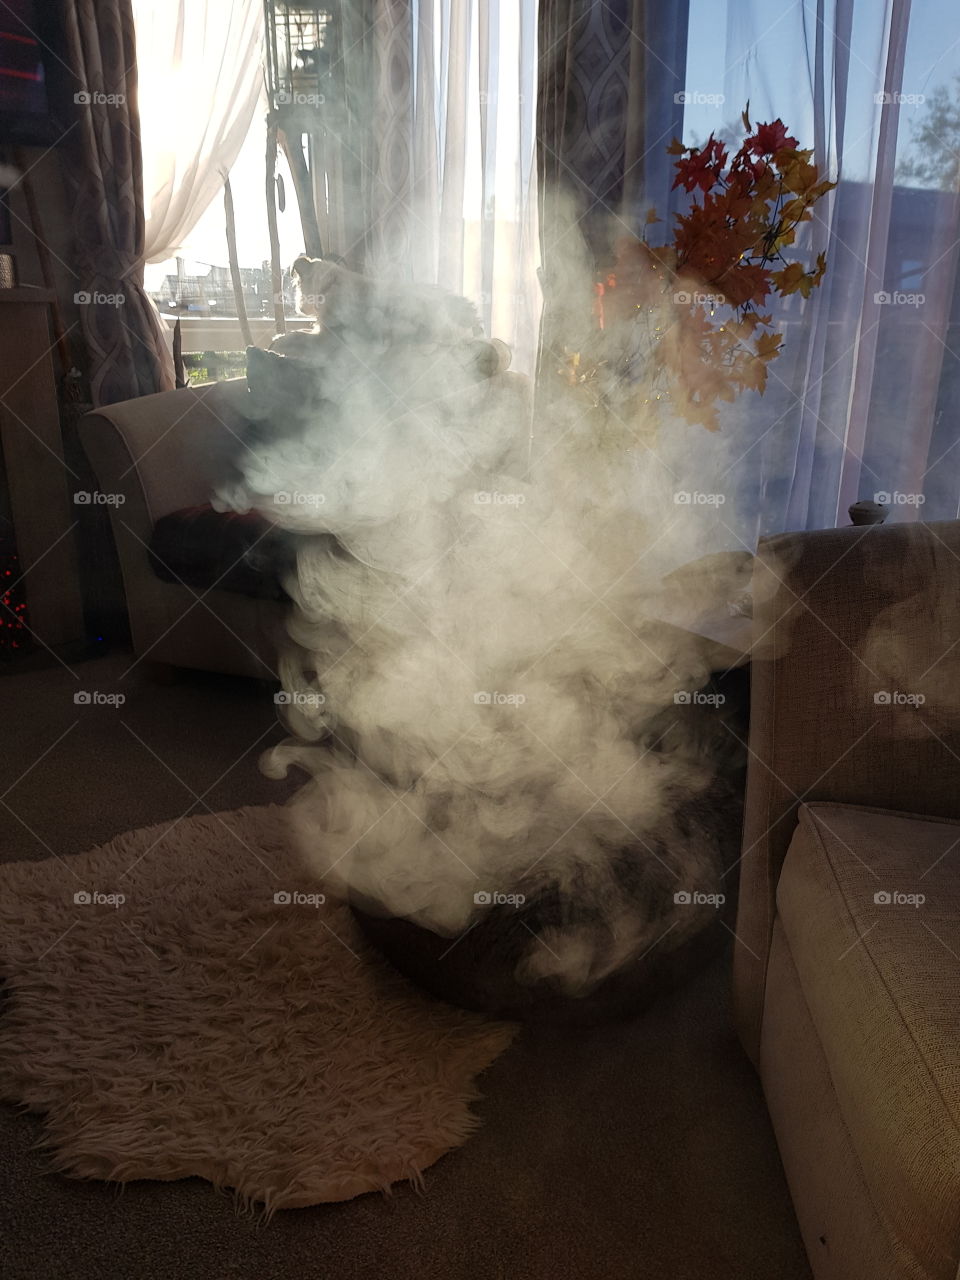 A cloud in my living room. Ghostly!